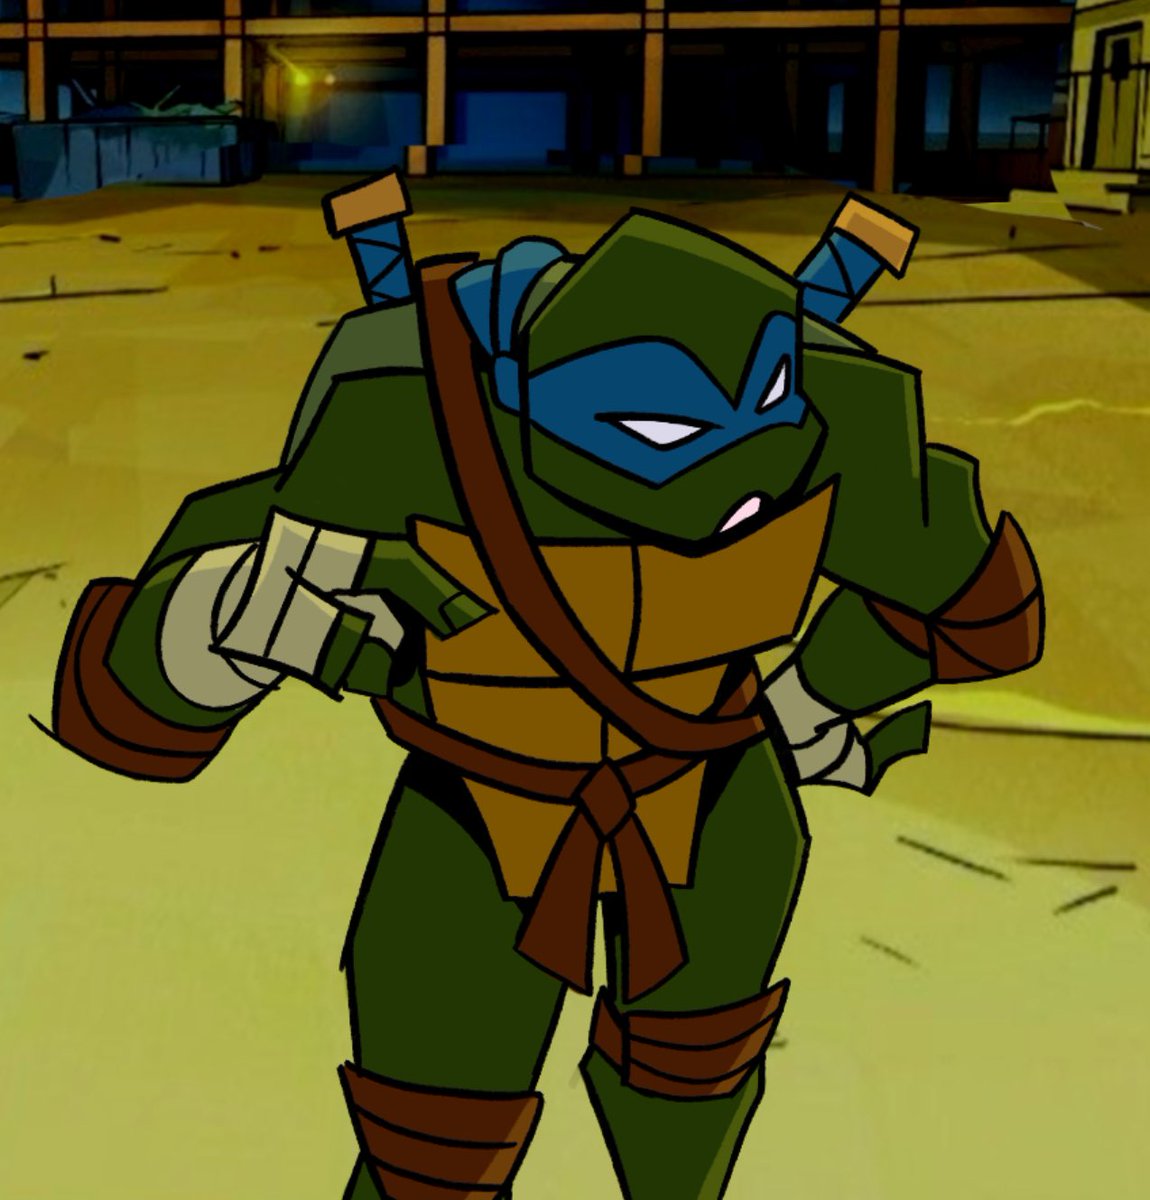 remember in rise season 3 when the 03 turtles showed up? my personal fav episode